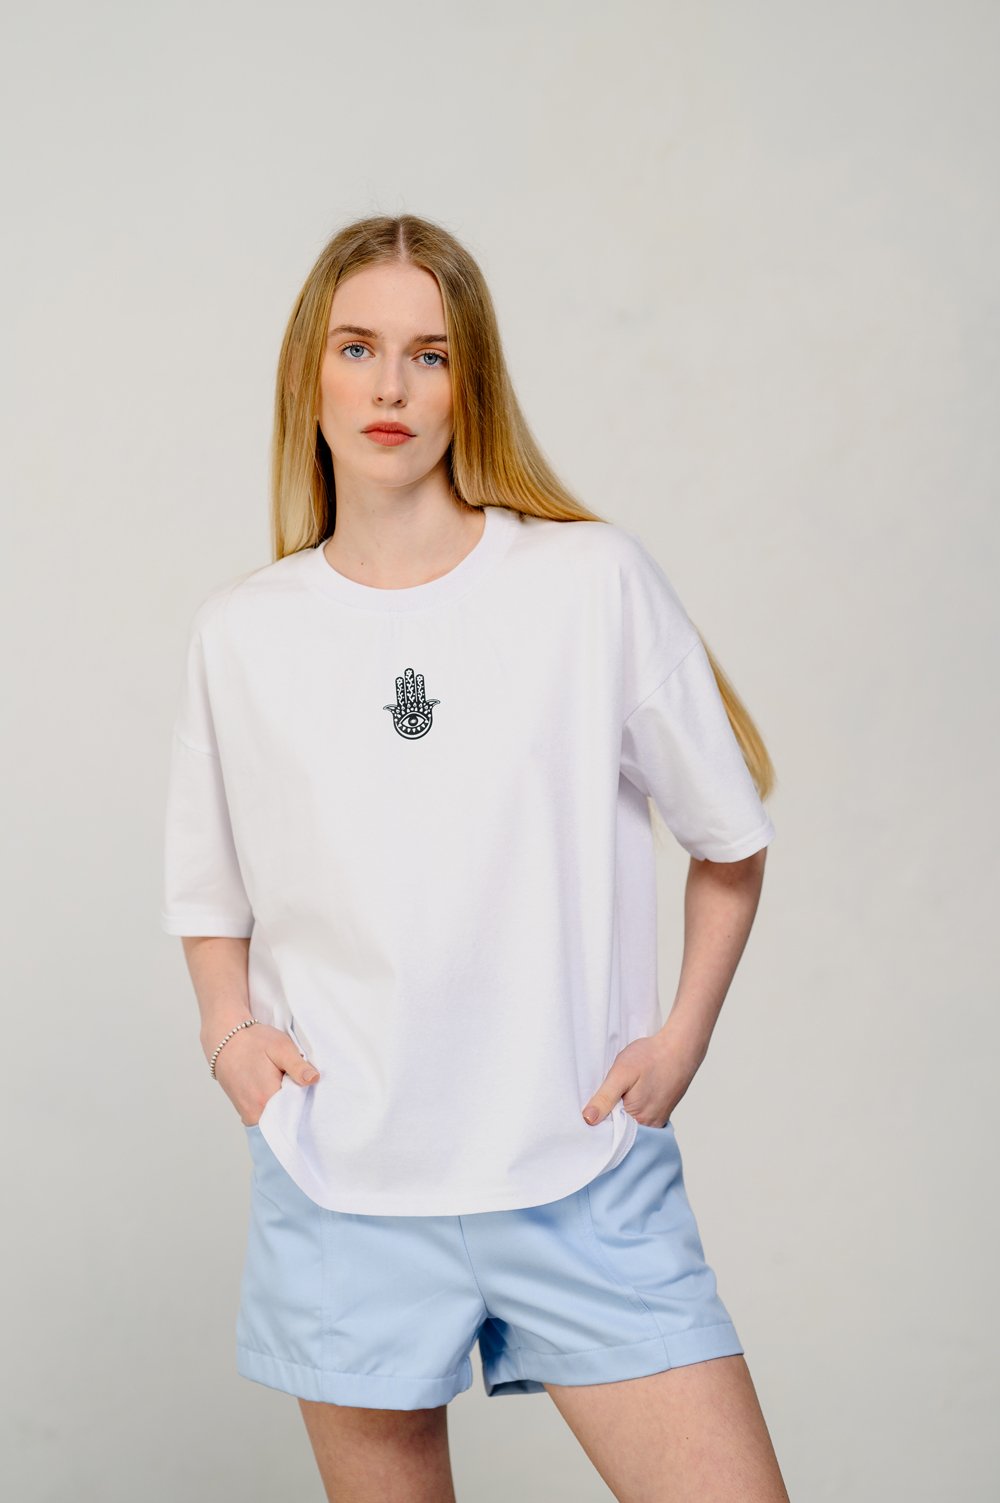 Oversized white T-shirt with sticker